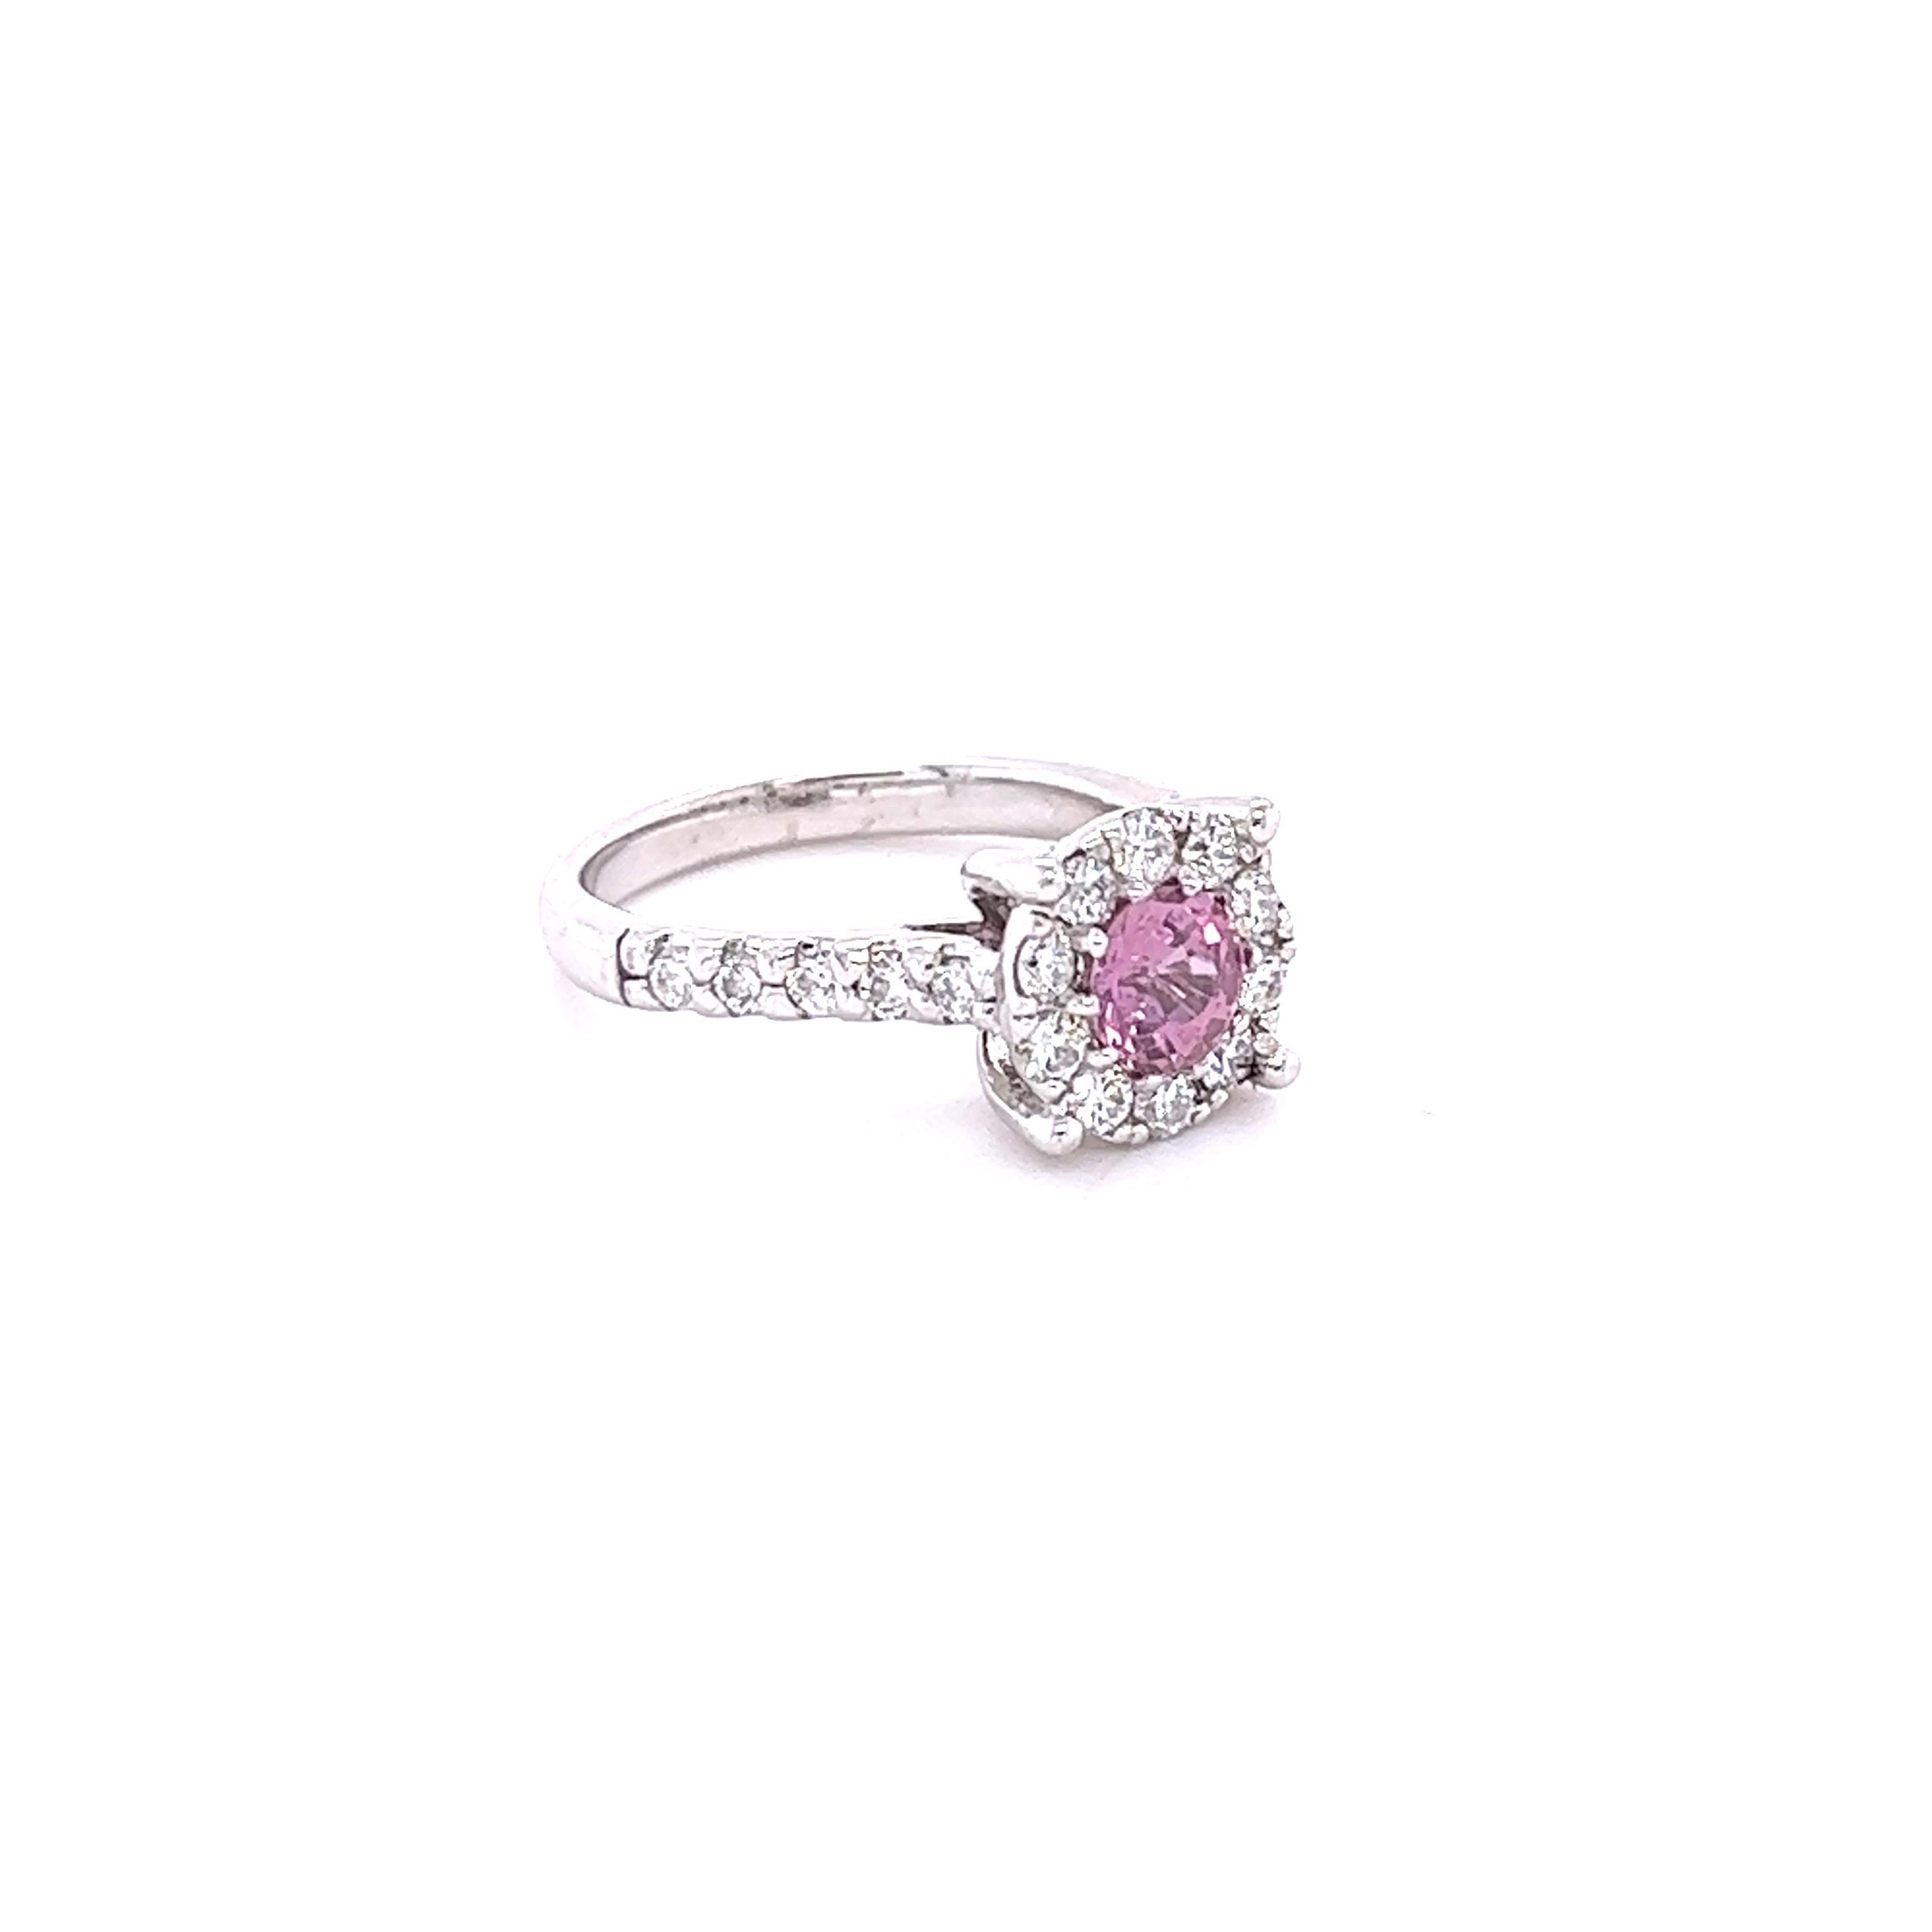 This beautiful ring has a Natural Round Cut Pink Sapphire that weighs 0.84 Carats and measures at approximately 5 mm. 

The ring is embellished with 20 Round Cut Diamonds that weigh 0.67 Carats with a clarity and color of SI-F.
The total carat